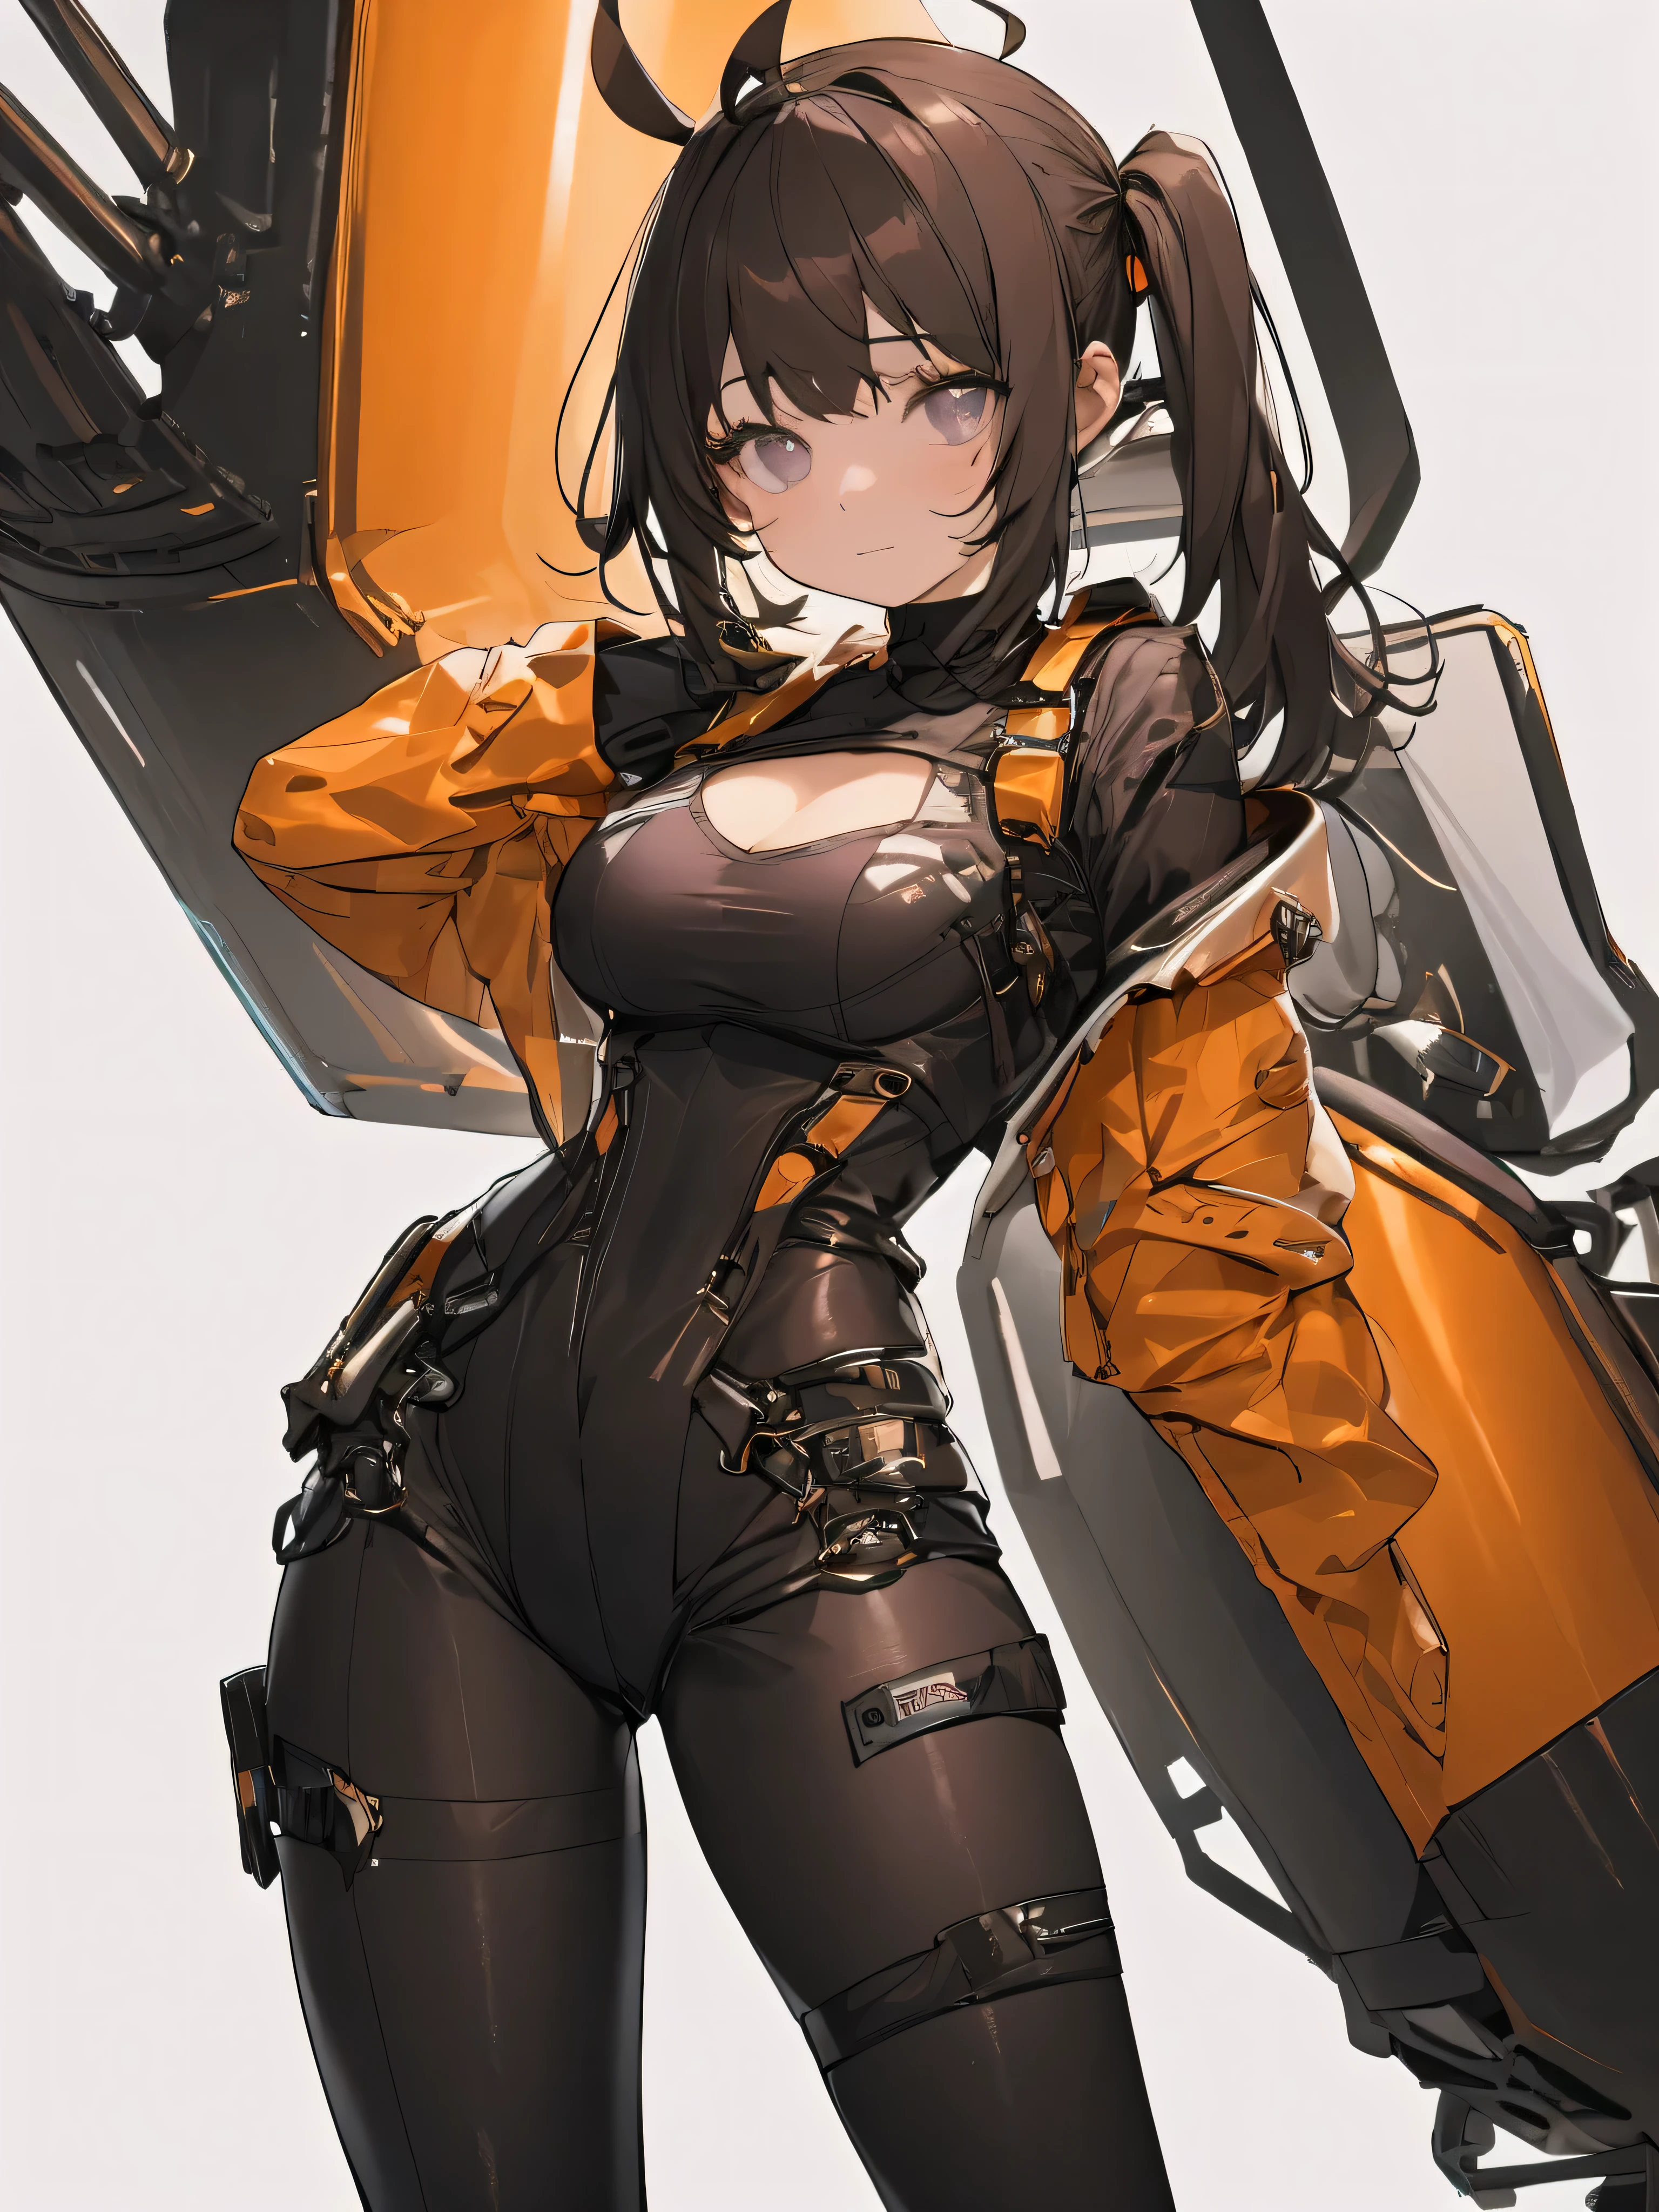 ((Best quality, 8K, Ultra-detailed, Masterpiece: 1.3)), 3 girl, Shiny skin, Sharp, Perfect body beauty, realistic shadow perfect body,("Black and dark orange bodysuit,futuristic,Transparent ":1.2),Big_Breasts ,Young girl, short girl,upper legs , indoors, White background,cleavage, standing arms down, fighter pilot harness,M legs， your ass, ("Dark Brown long hair, ahoge, black pupils dark purple eyes ,Sideswept parted hair":1.5), portrait shot,(" no background":2)